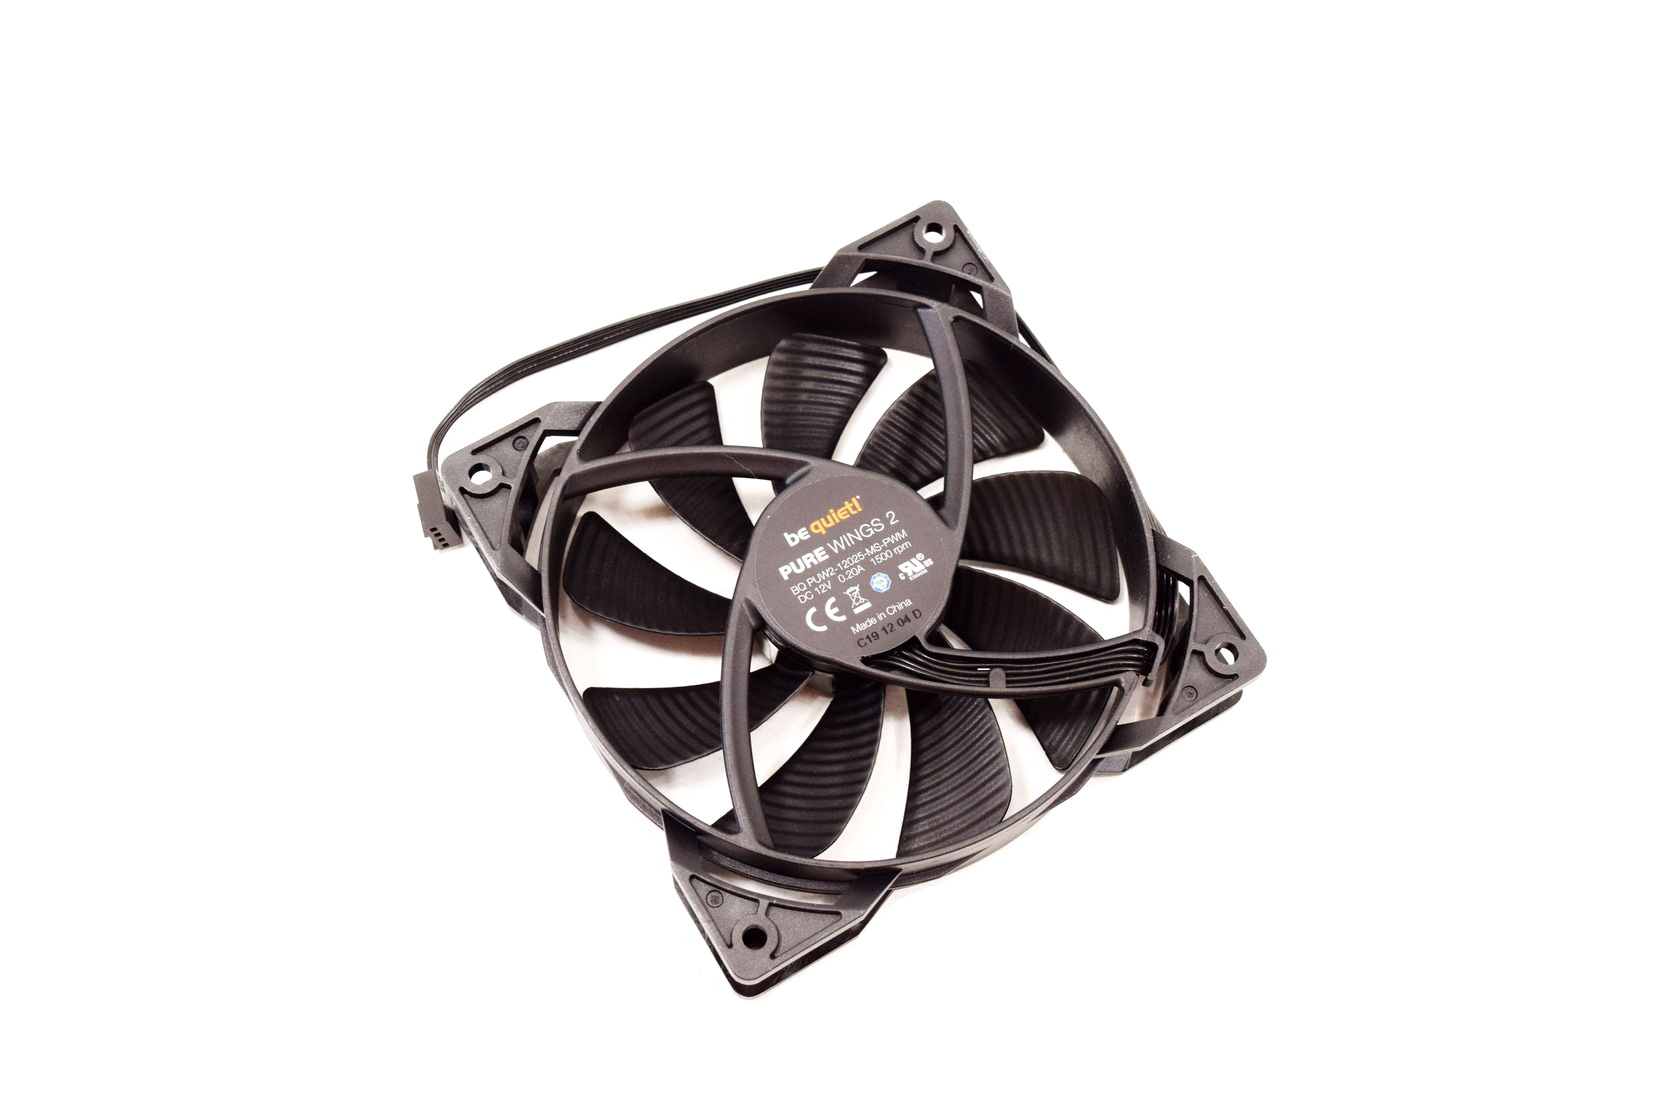 be quiet! Pure Rock CPU Cooler Review 2